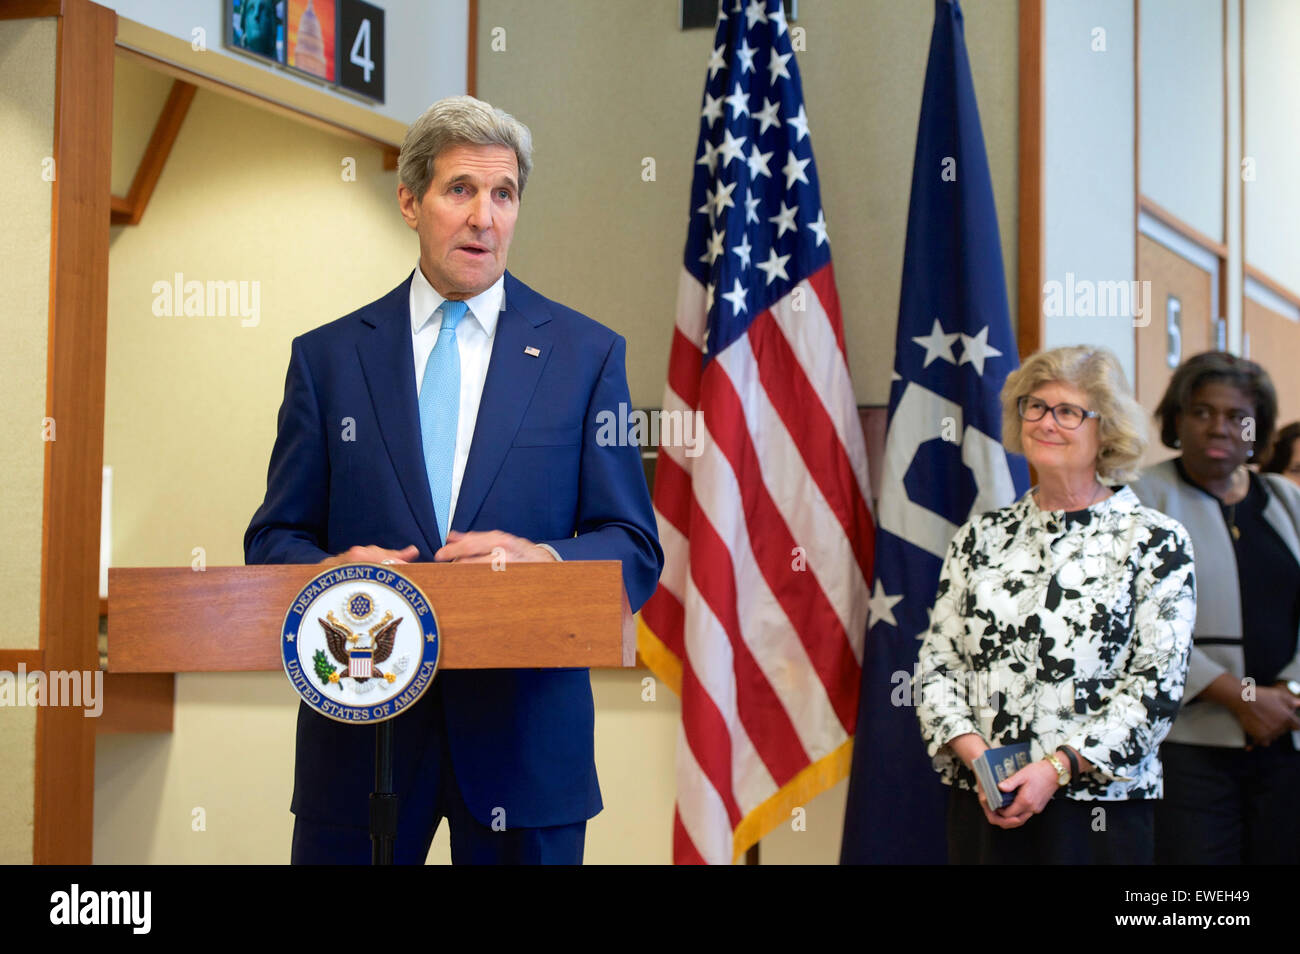 U.S. Secretary of State John Kerry, watched by Acting Assistant Secretary of State for Consular Affairs Michele Bond, chats with a Yemeni-American who received travel documents for family members who had to flee from Yemen during an event at the U.S. Embassy in Djibouti, Djibouti, on May 6, 2015, after the Secretary visited a local mosque, met with President Ismail Omar Guelleh and the Foreign Minister, and before a visit with U.S. forces at Camp Lemonnier. Stock Photo